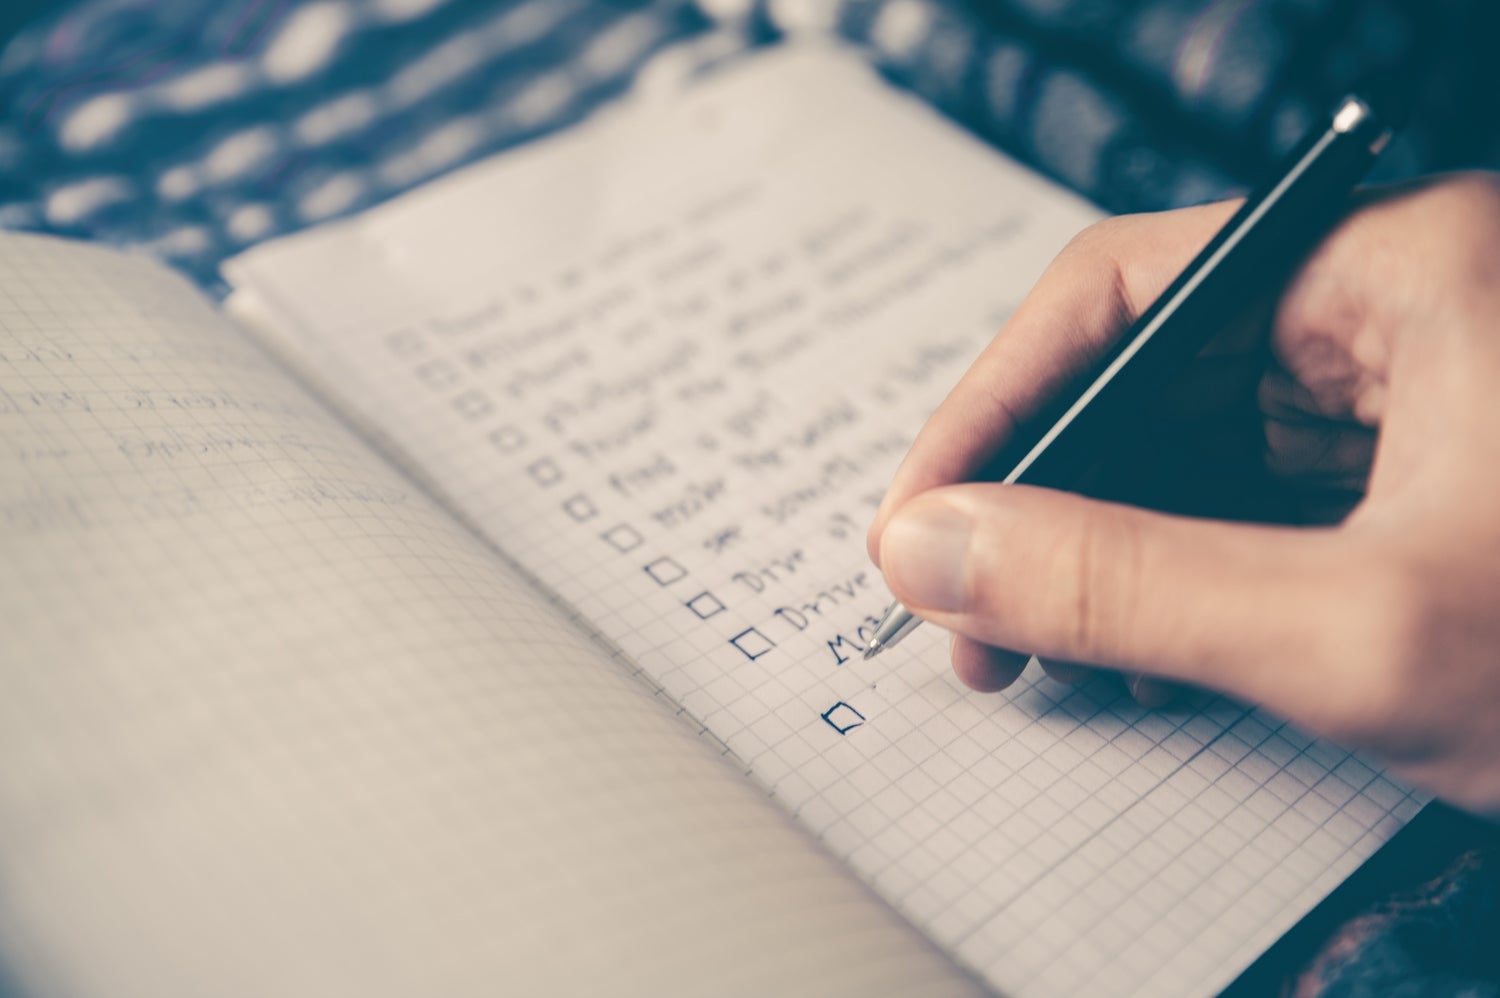 A person writing a to-do list in a notebook.